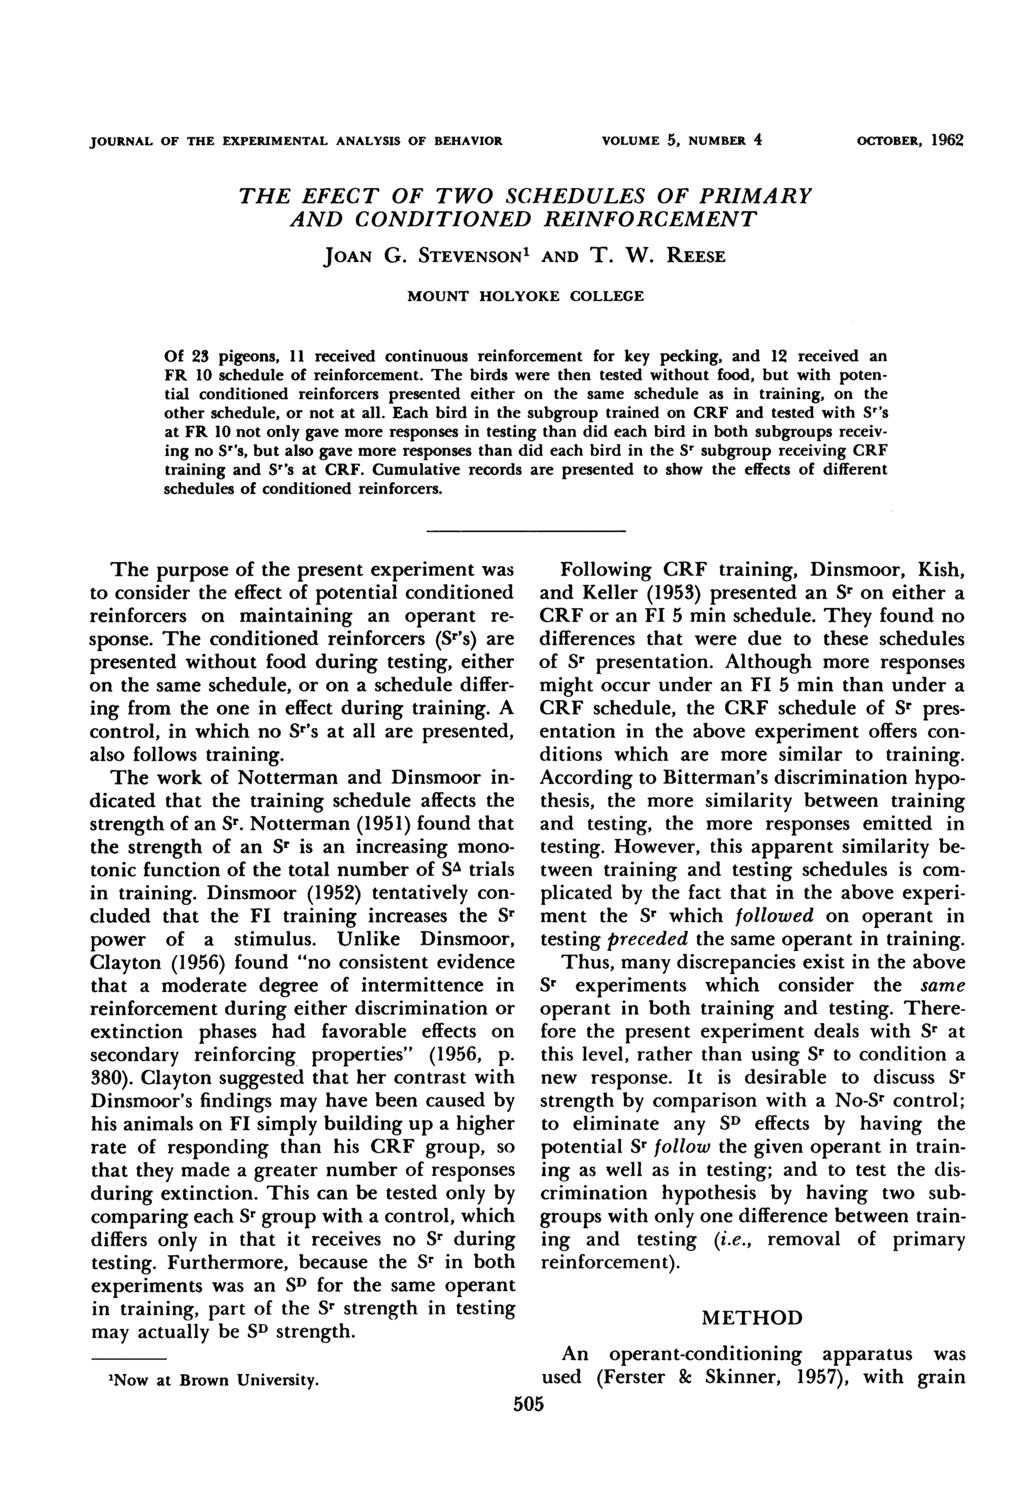 JOURNAL OF THE EXPERIMENTAL ANALYSIS OF BEHAVIOR VOLUME 5, NUMBF- 4 OCITOBER, 1 962 THE EFECT OF TWO SCHEDULES OF PRIMARY AND CONDITIONED REINFORCEMENT JOAN G. STEVENSON1 AND T. W.